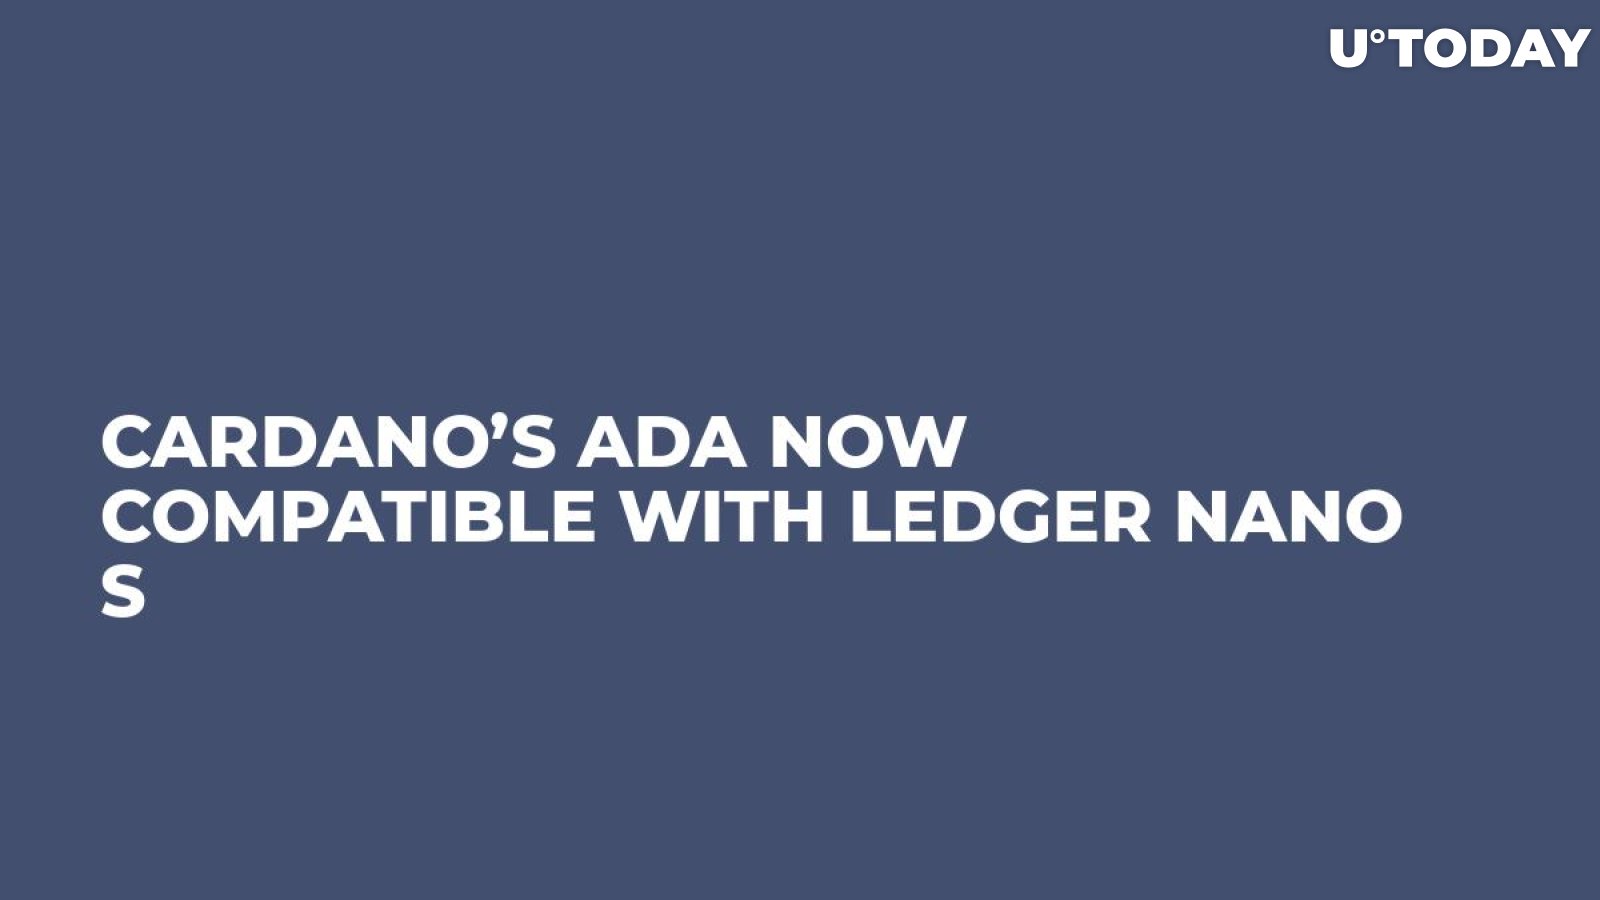 Cardano’s ADA Now Compatible with Ledger Nano S